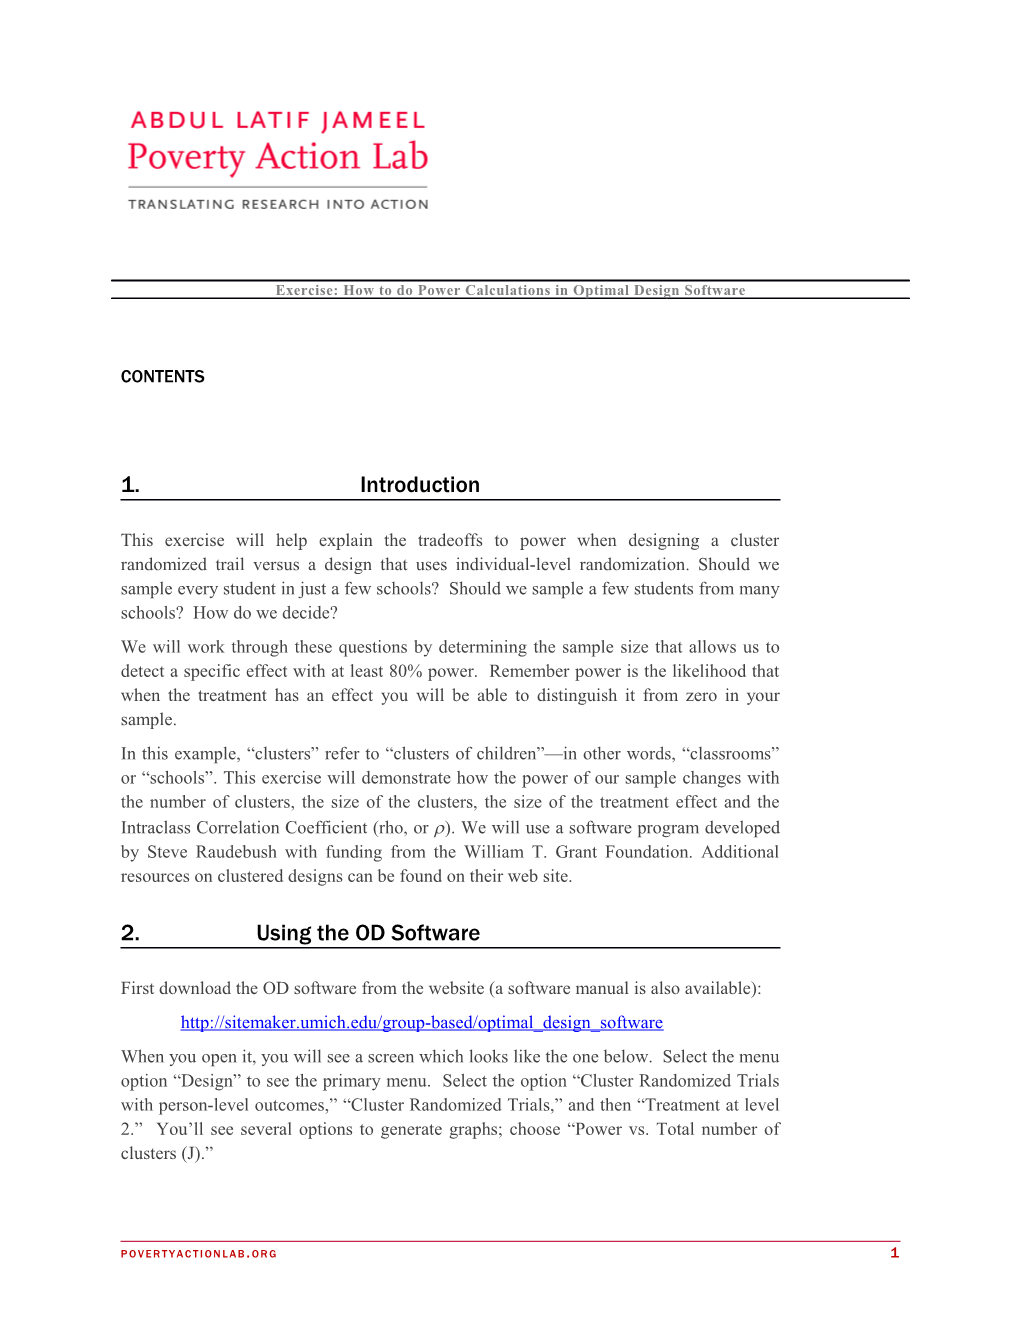 Power Calculations with Stata Abdul Latif Jameel Poverty Action Lab